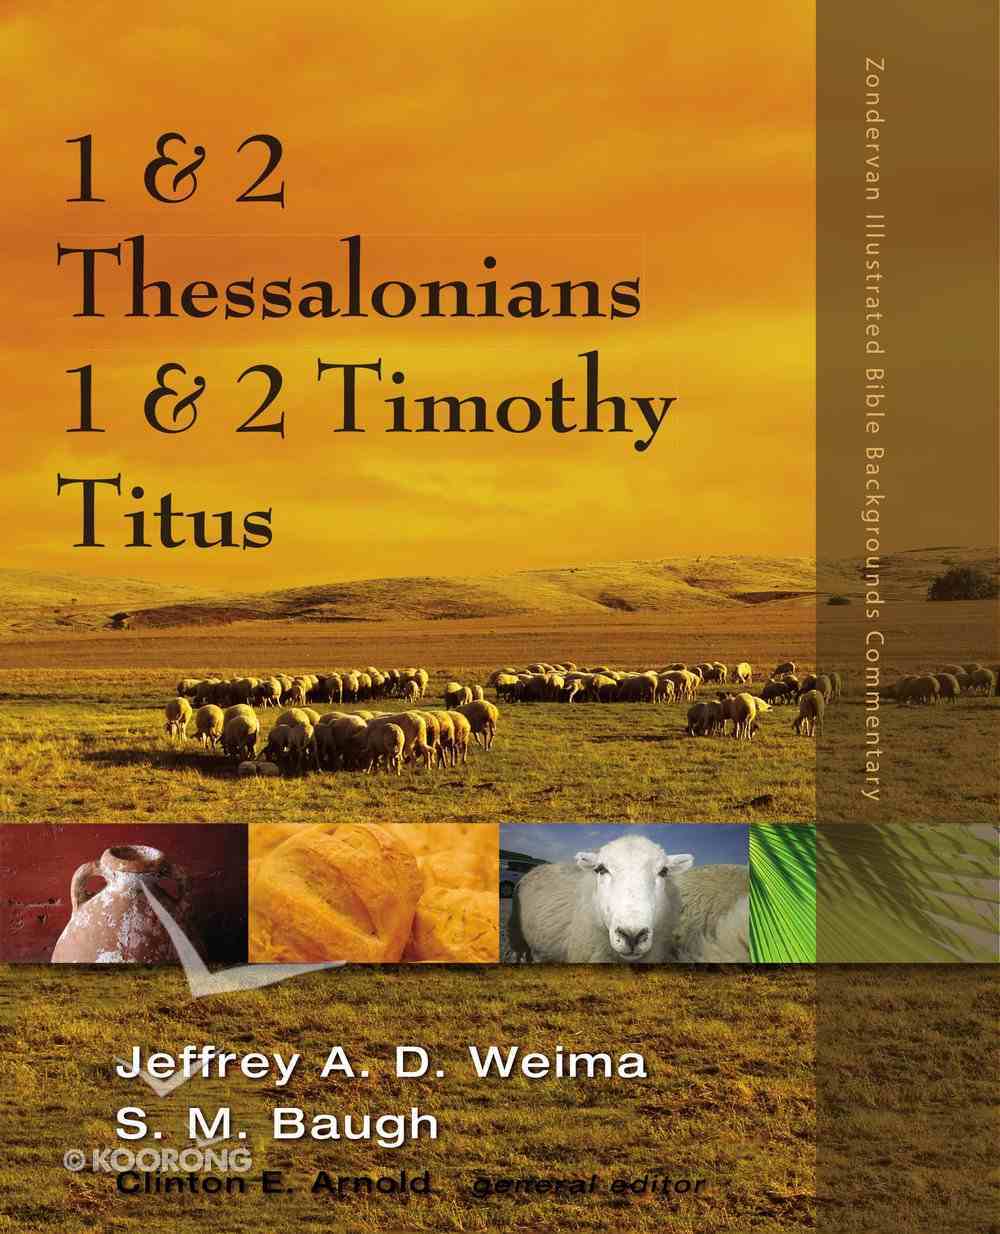 1 & 2 Thessalonians, 1 & 2 Timothy, Titus (Zondervan Illustrated Bible Backgrounds Commentary Series) eBook